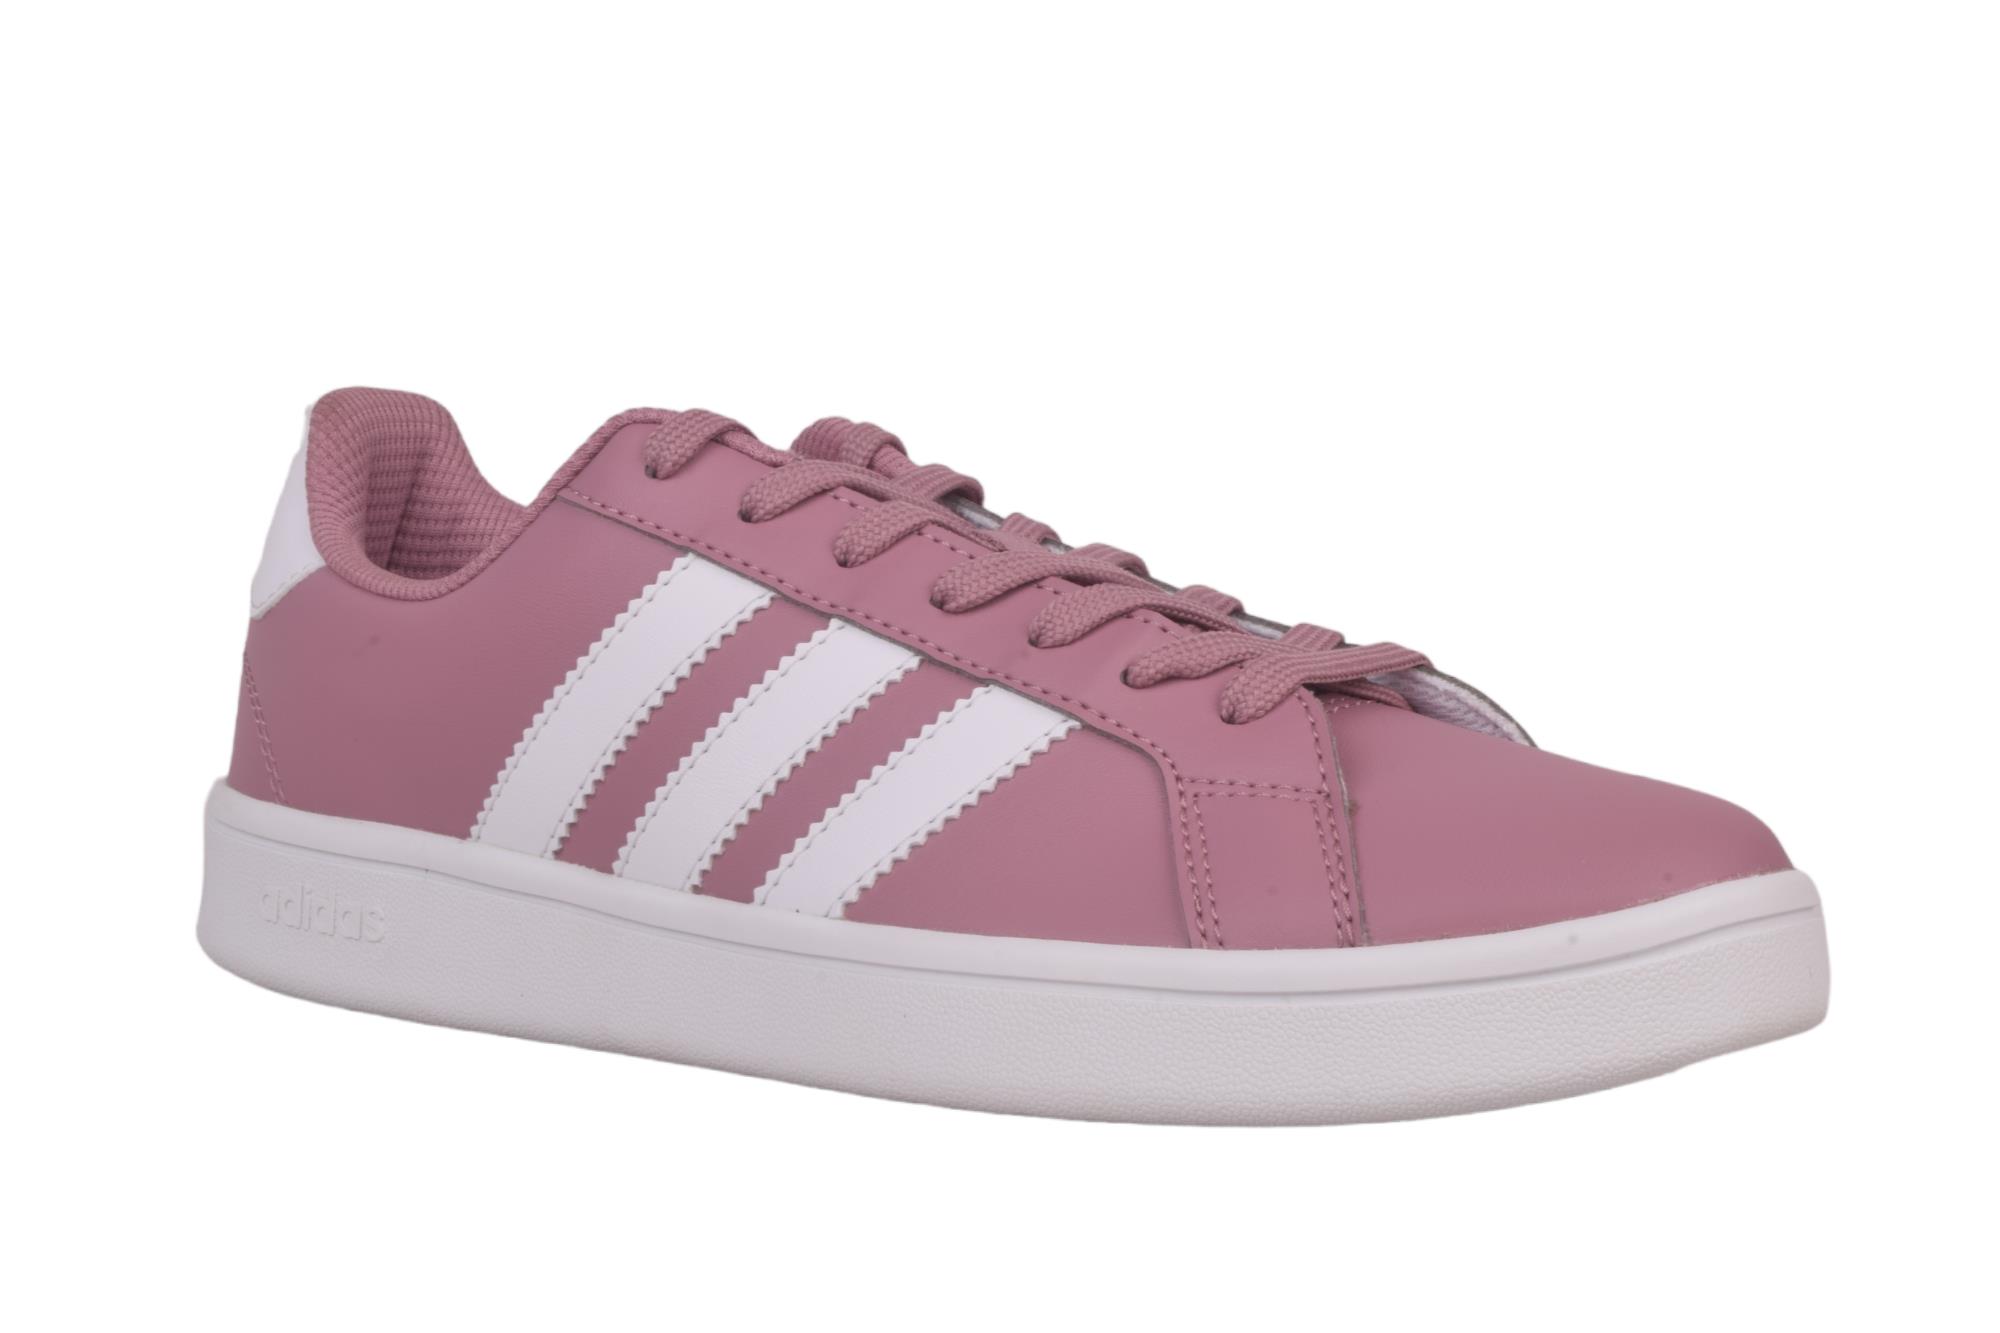 Details more than 192 adidas female sneakers super hot